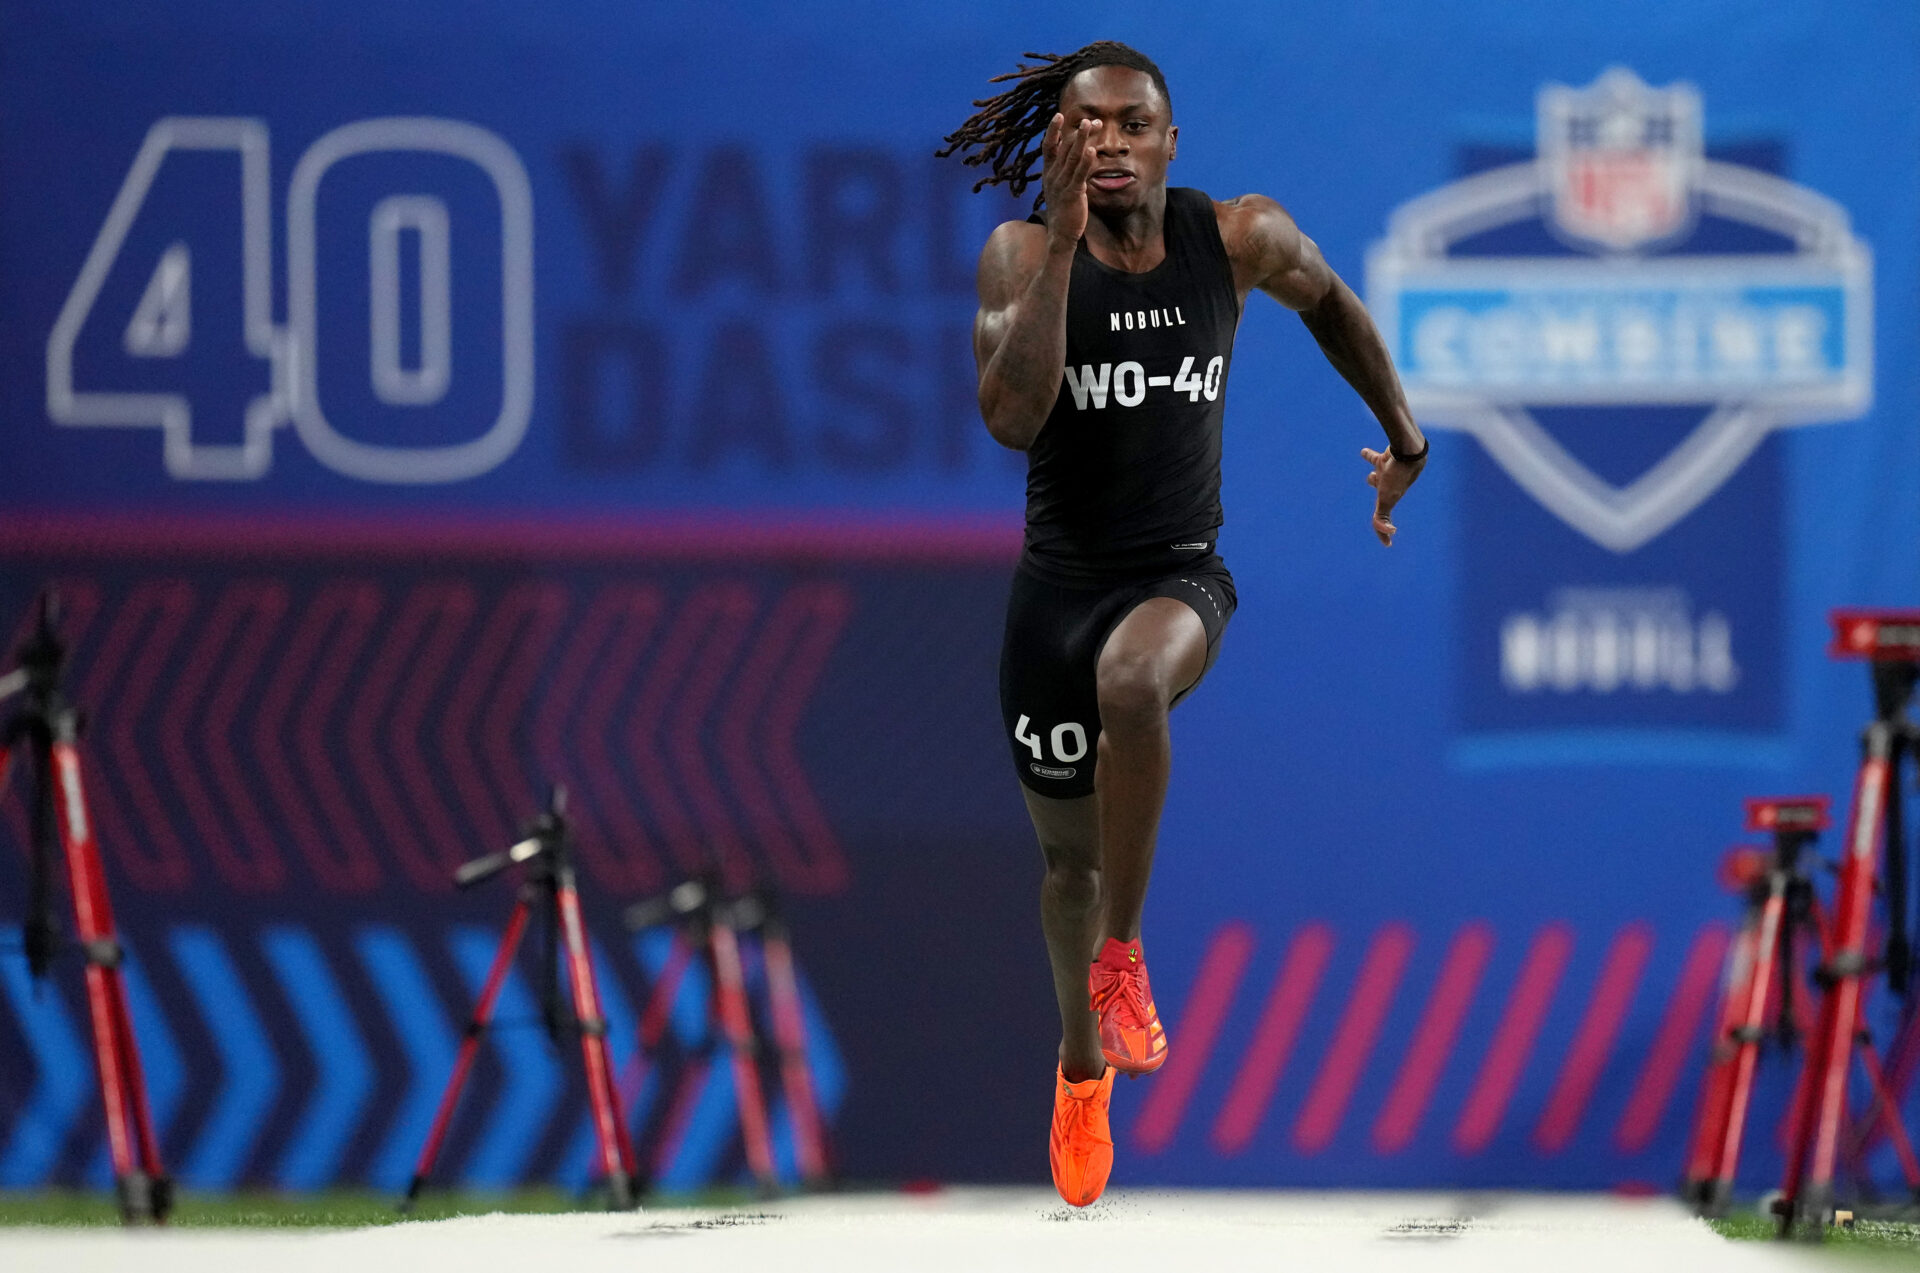 Mar 2, 2024; Indianapolis, IN, USA; Texas wide receiver Xavier Worthy (WO40) during the 2024 NFL Combine at Lucas Oil Stadium. Mandatory Credit: Kirby Lee-USA TODAY Sports